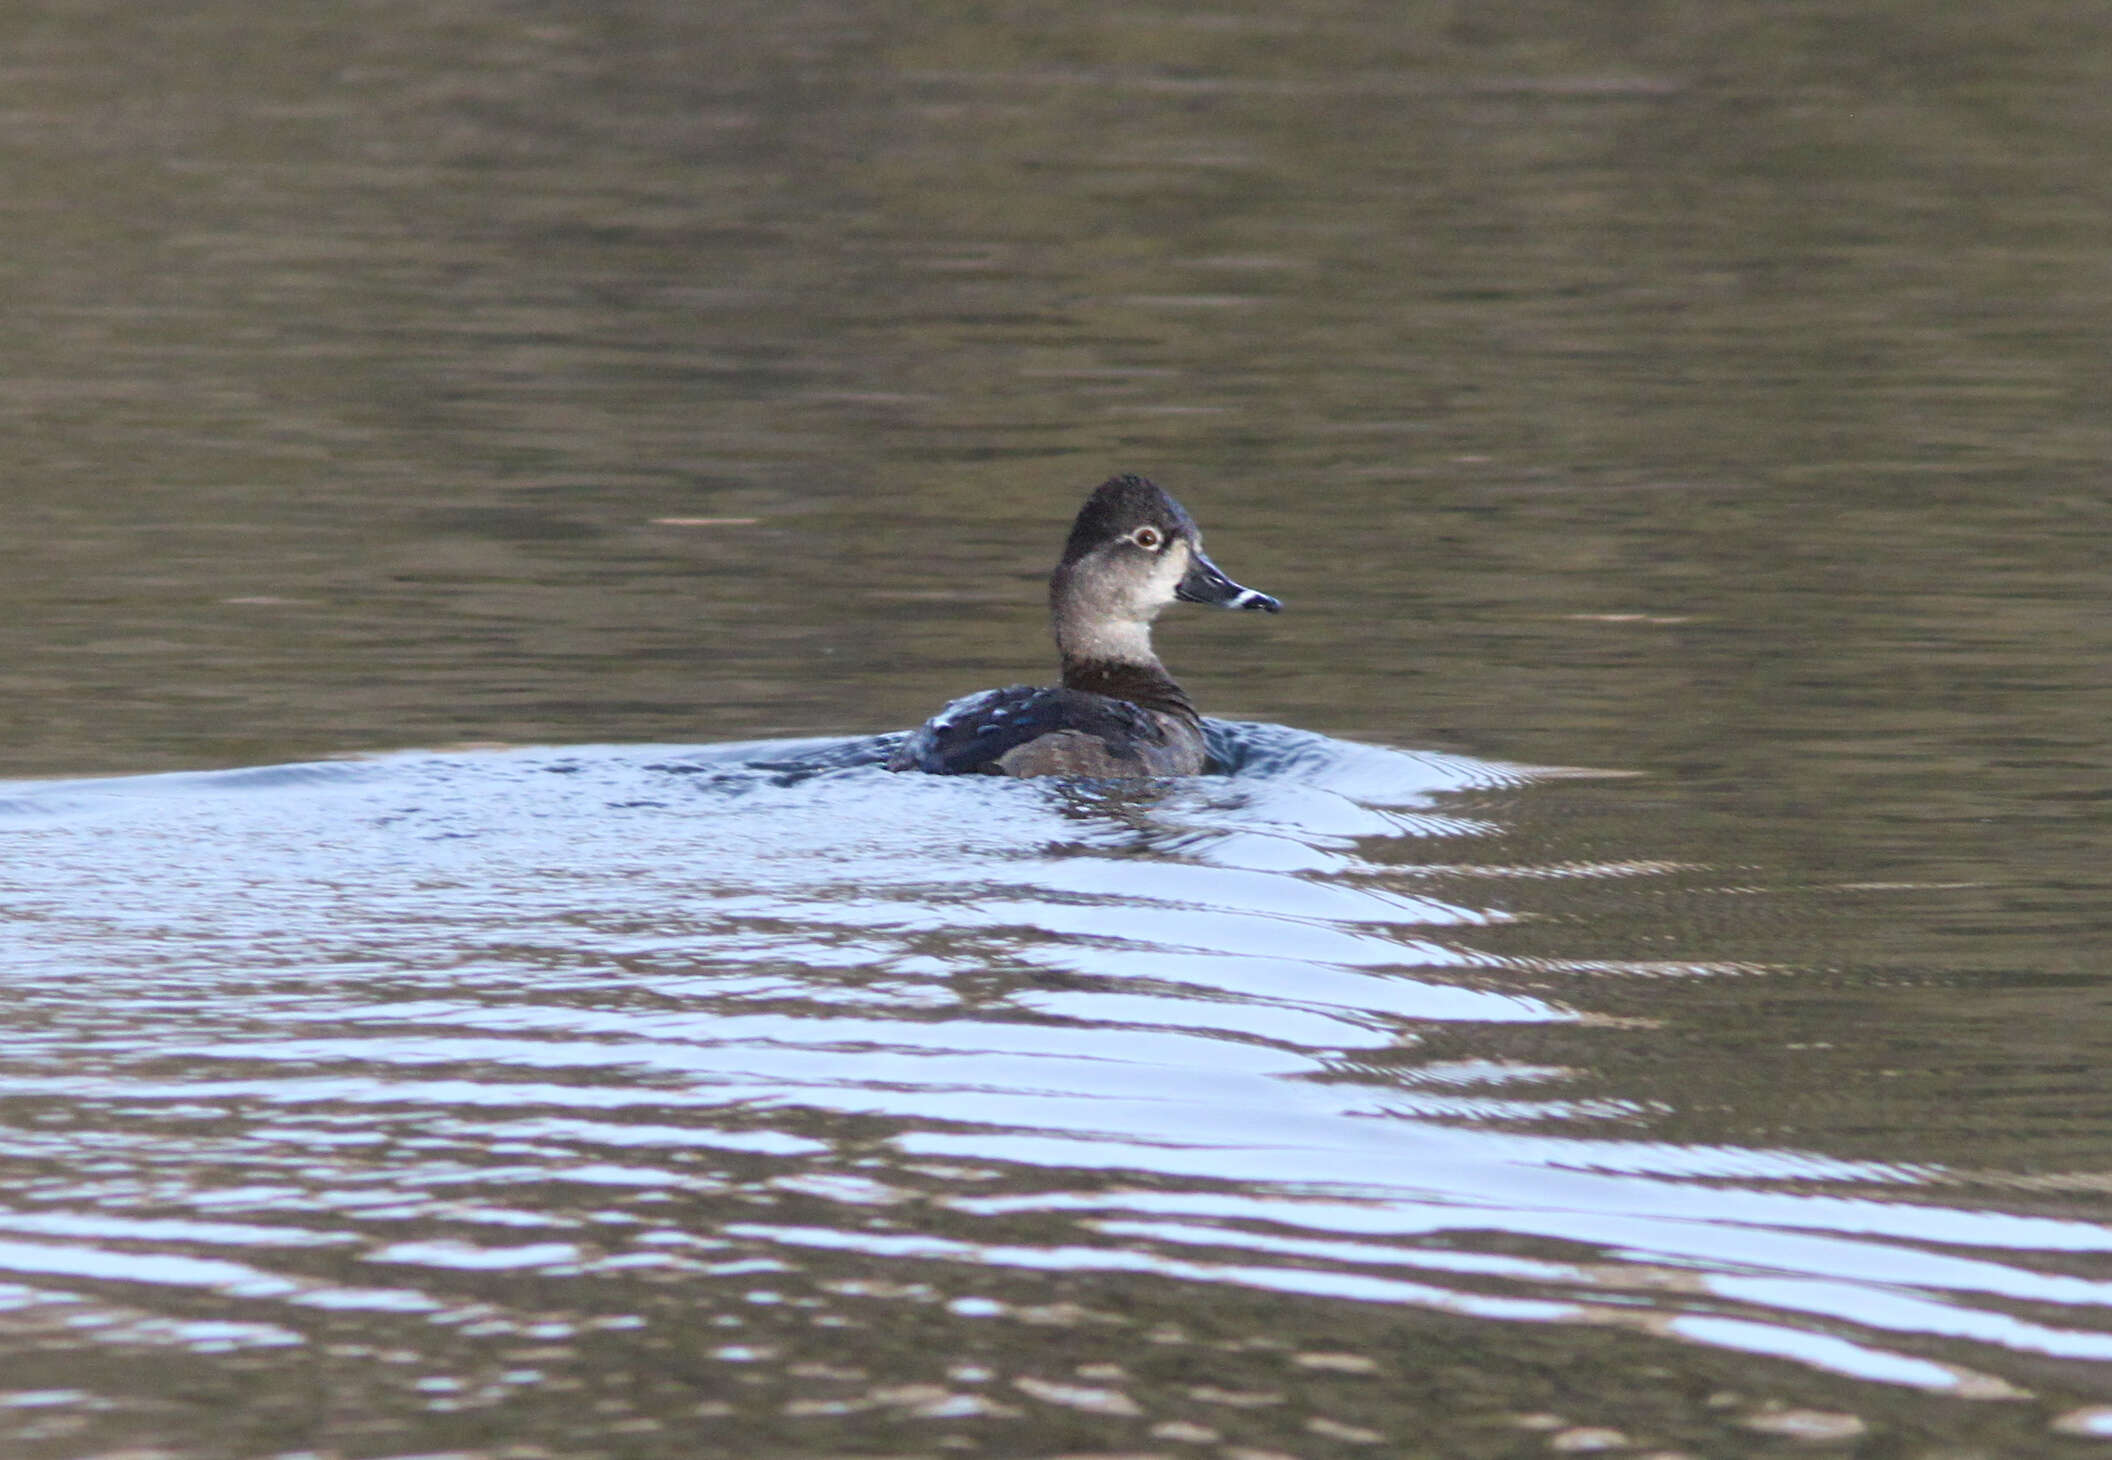 Image of Ring-necked Duck